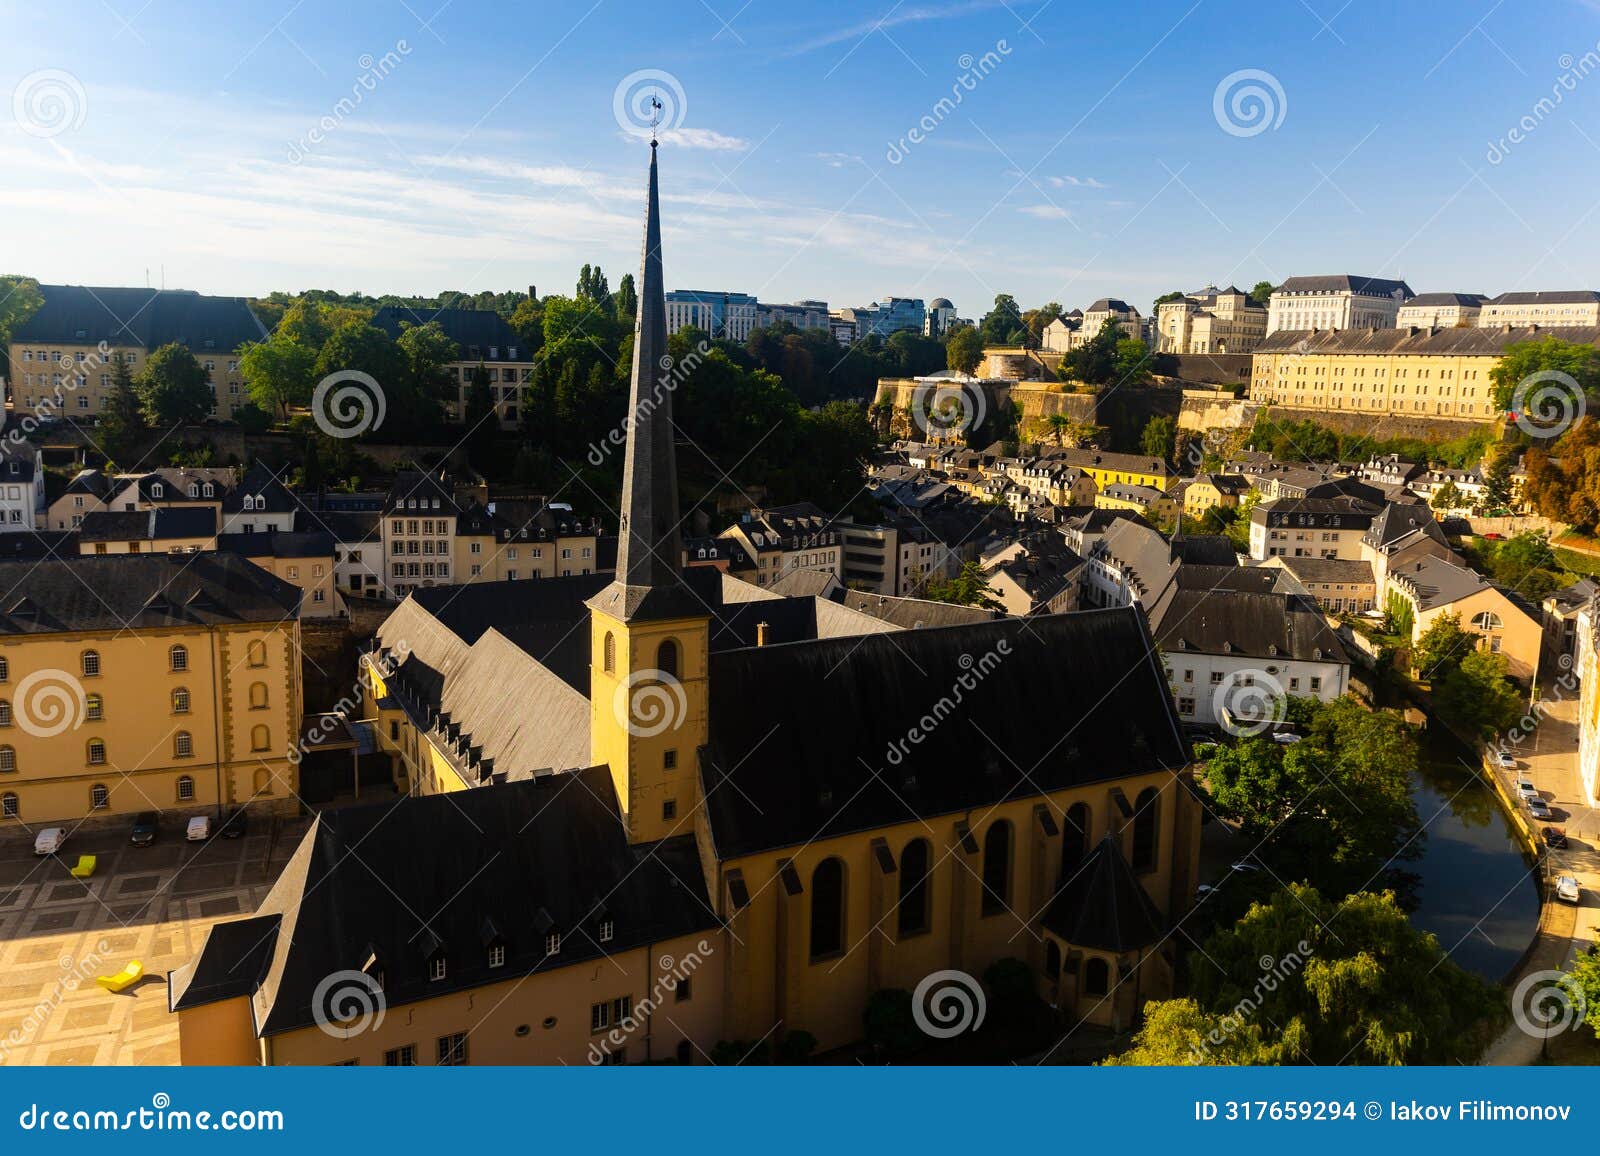 st john's church from outside. grund district, luxembourg city